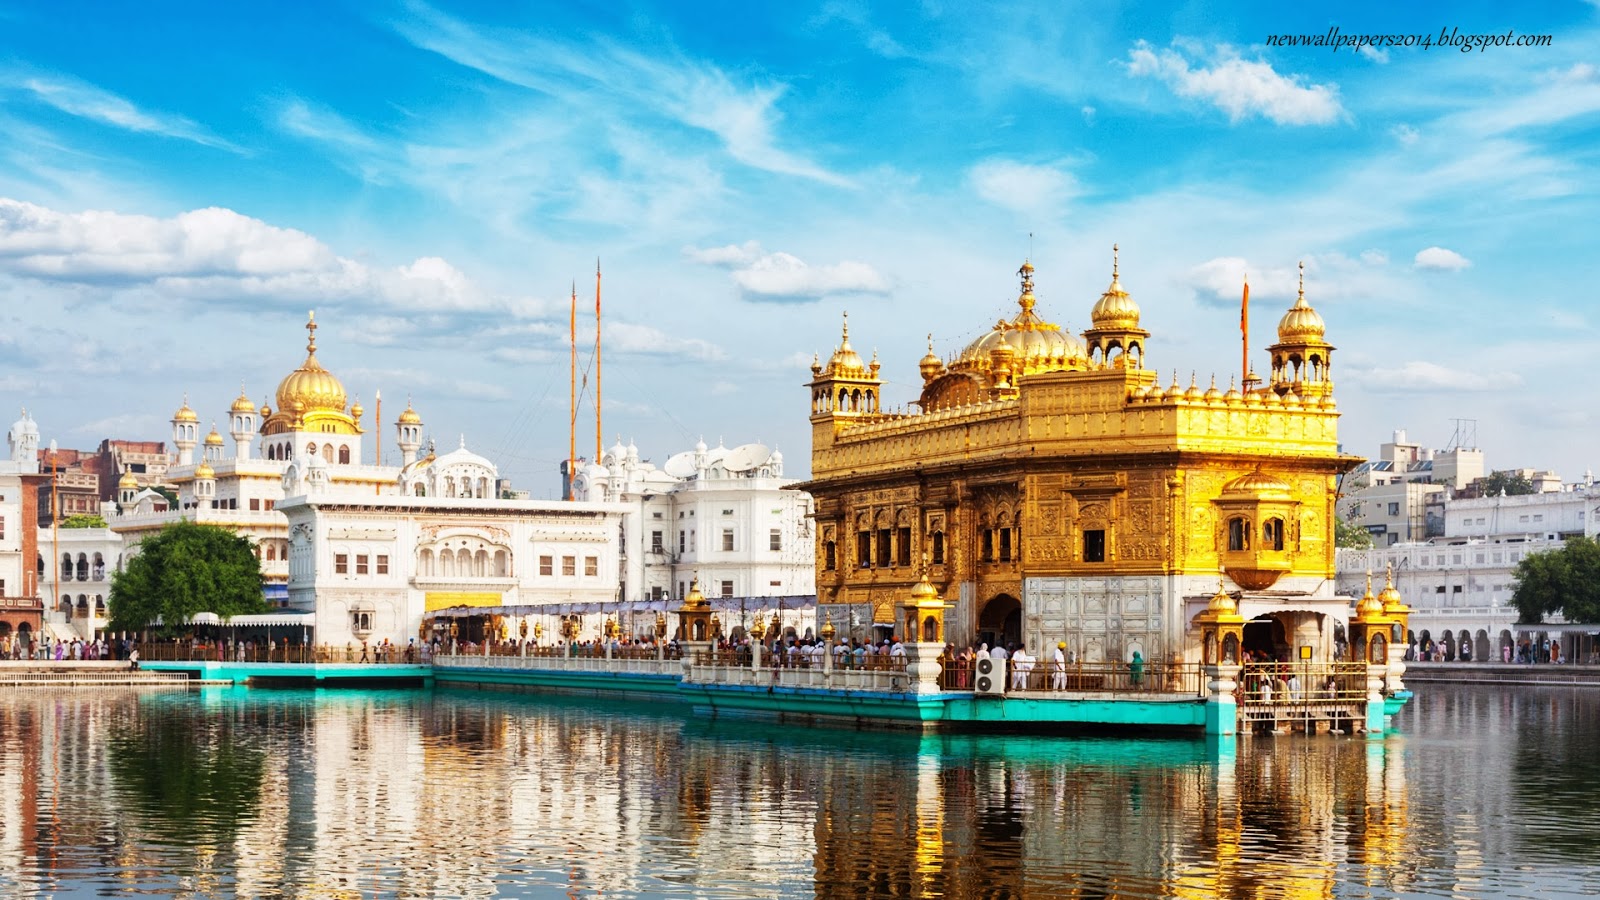  Golden Temple  The Golden Temple HD Wallpapers   Hd Wallpapers 2014